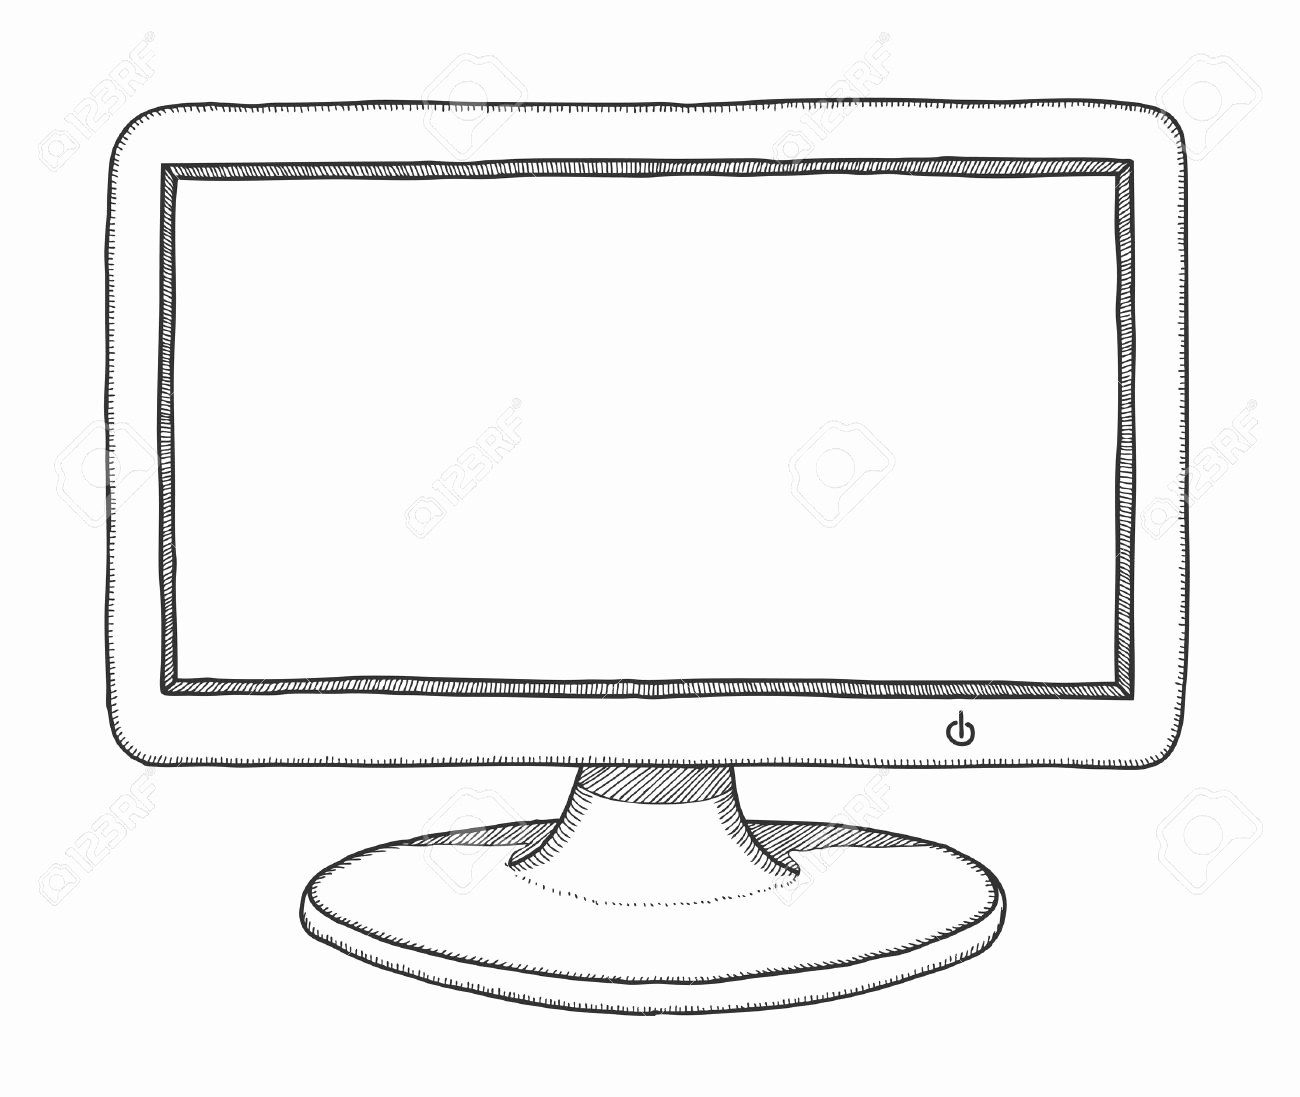 Computer Monitor Sketch at Explore collection of